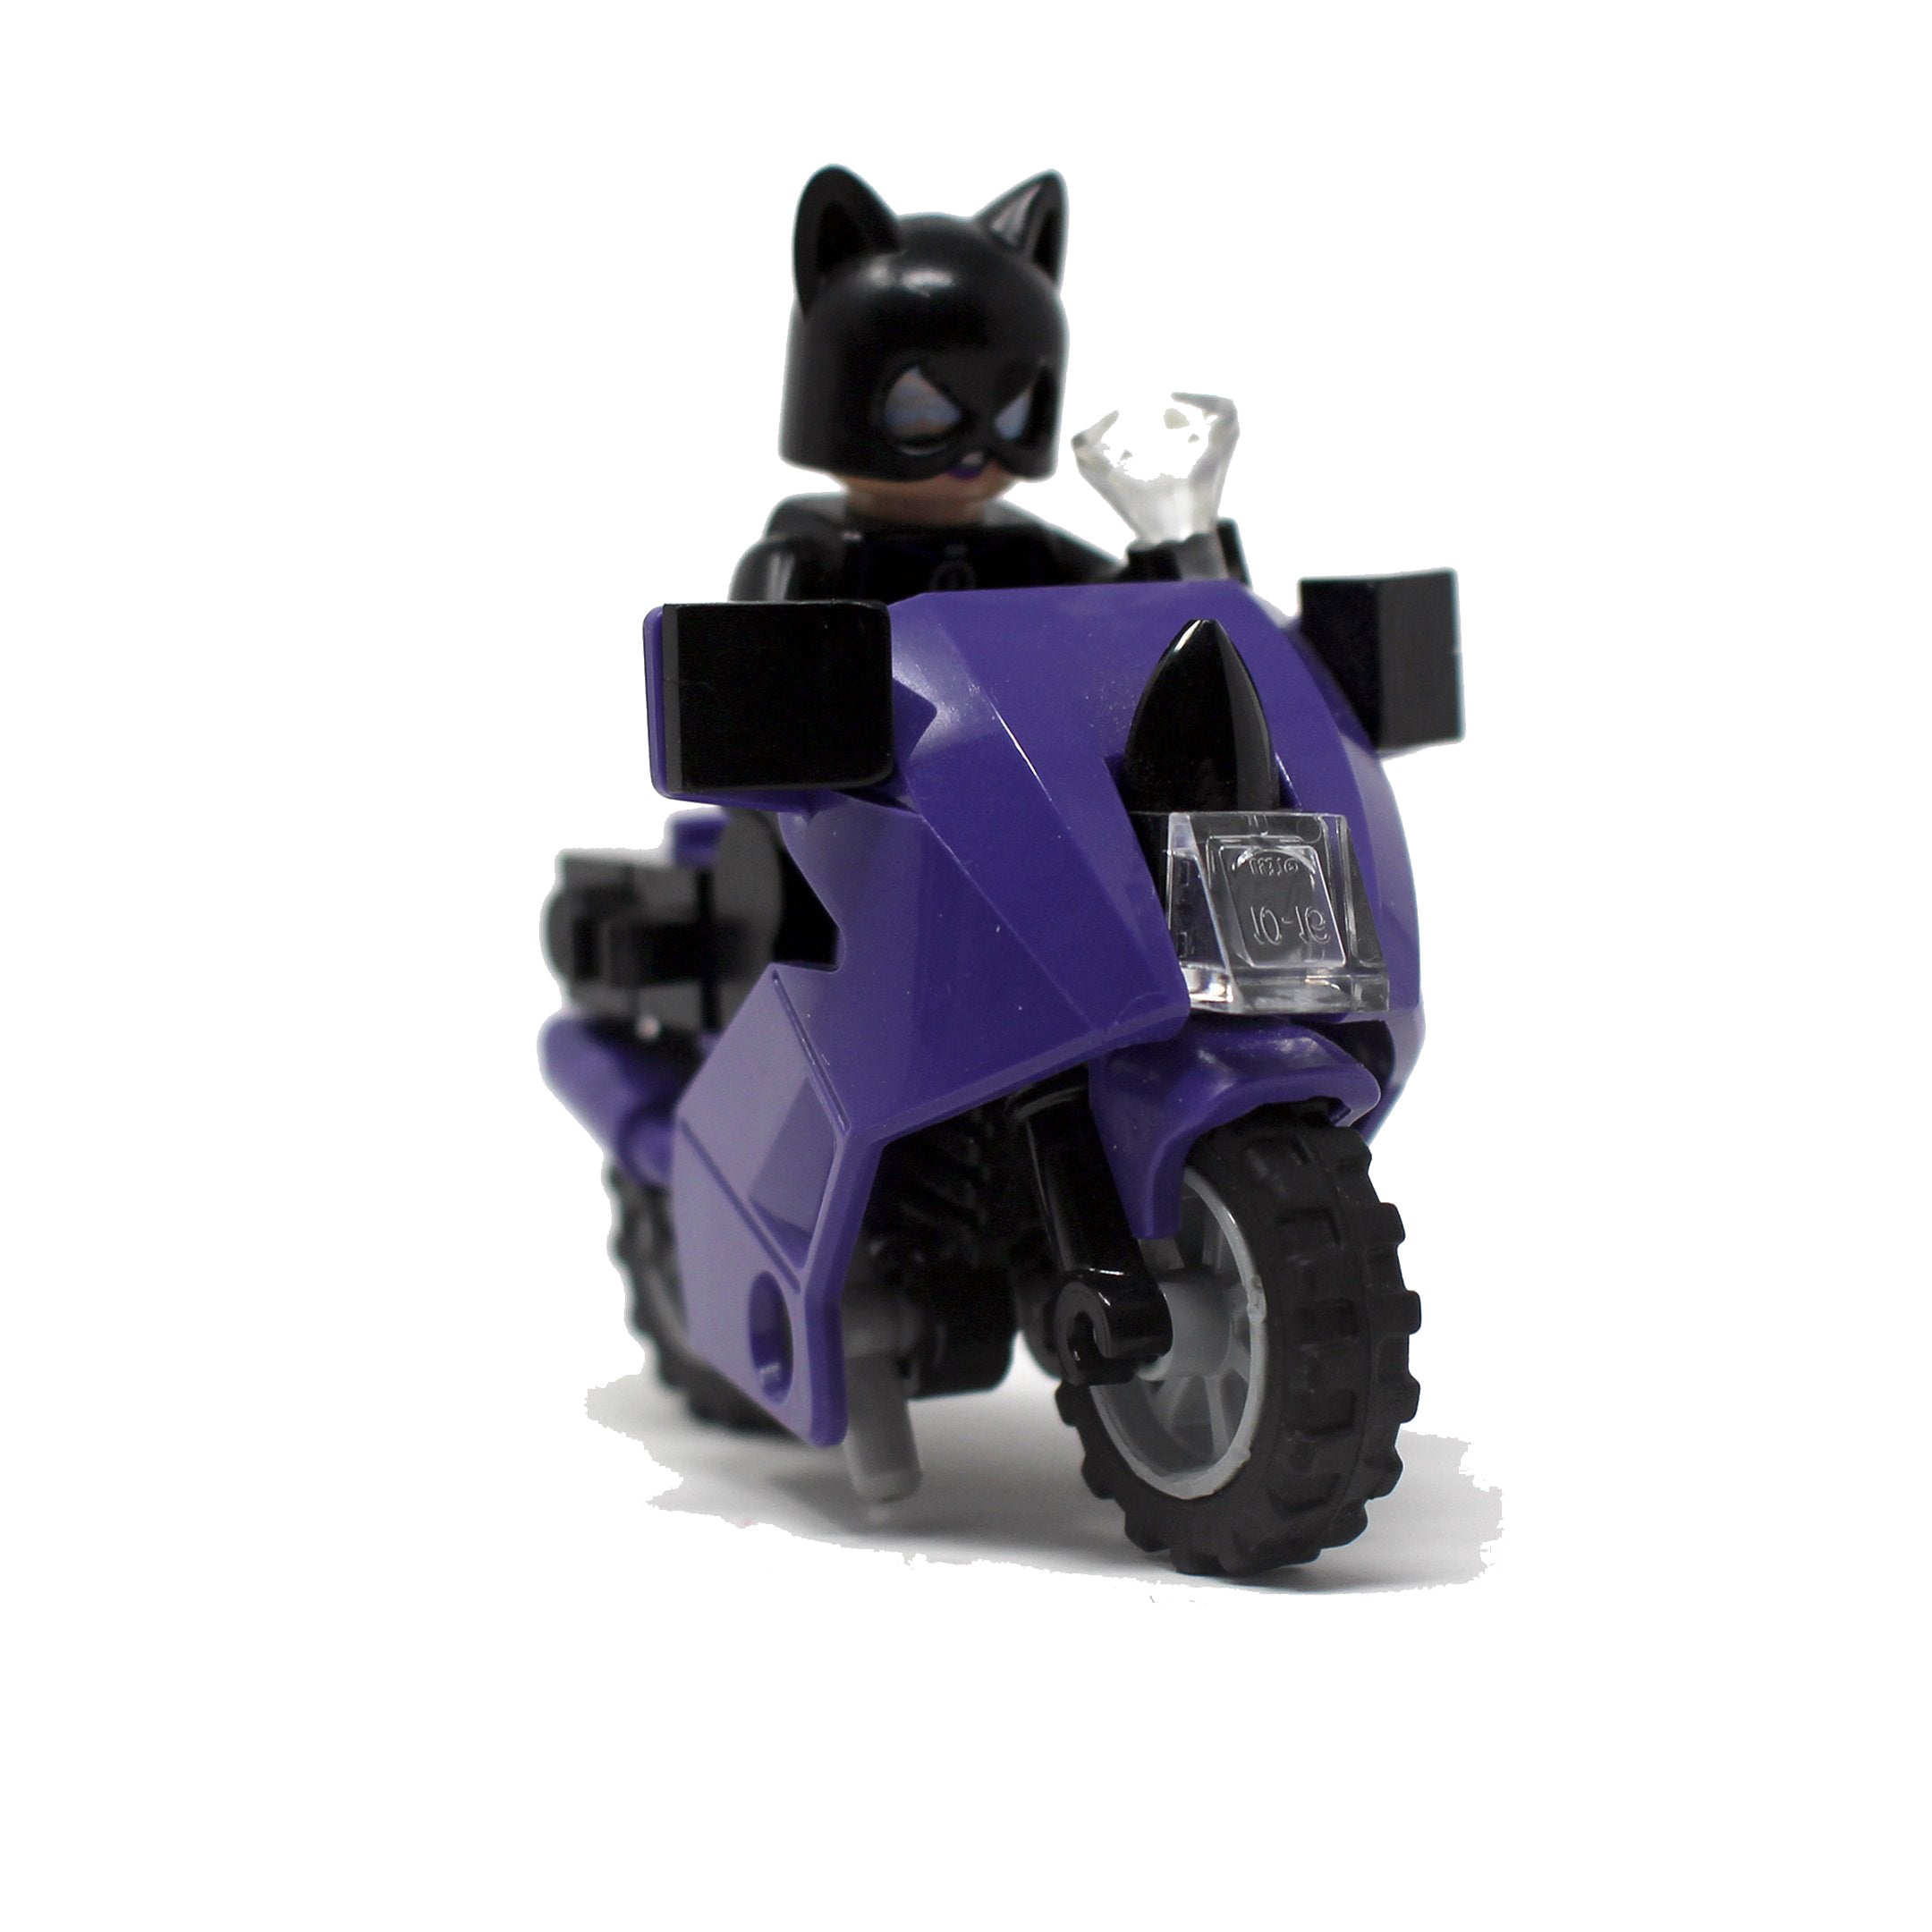 Catwoman and Catcycle